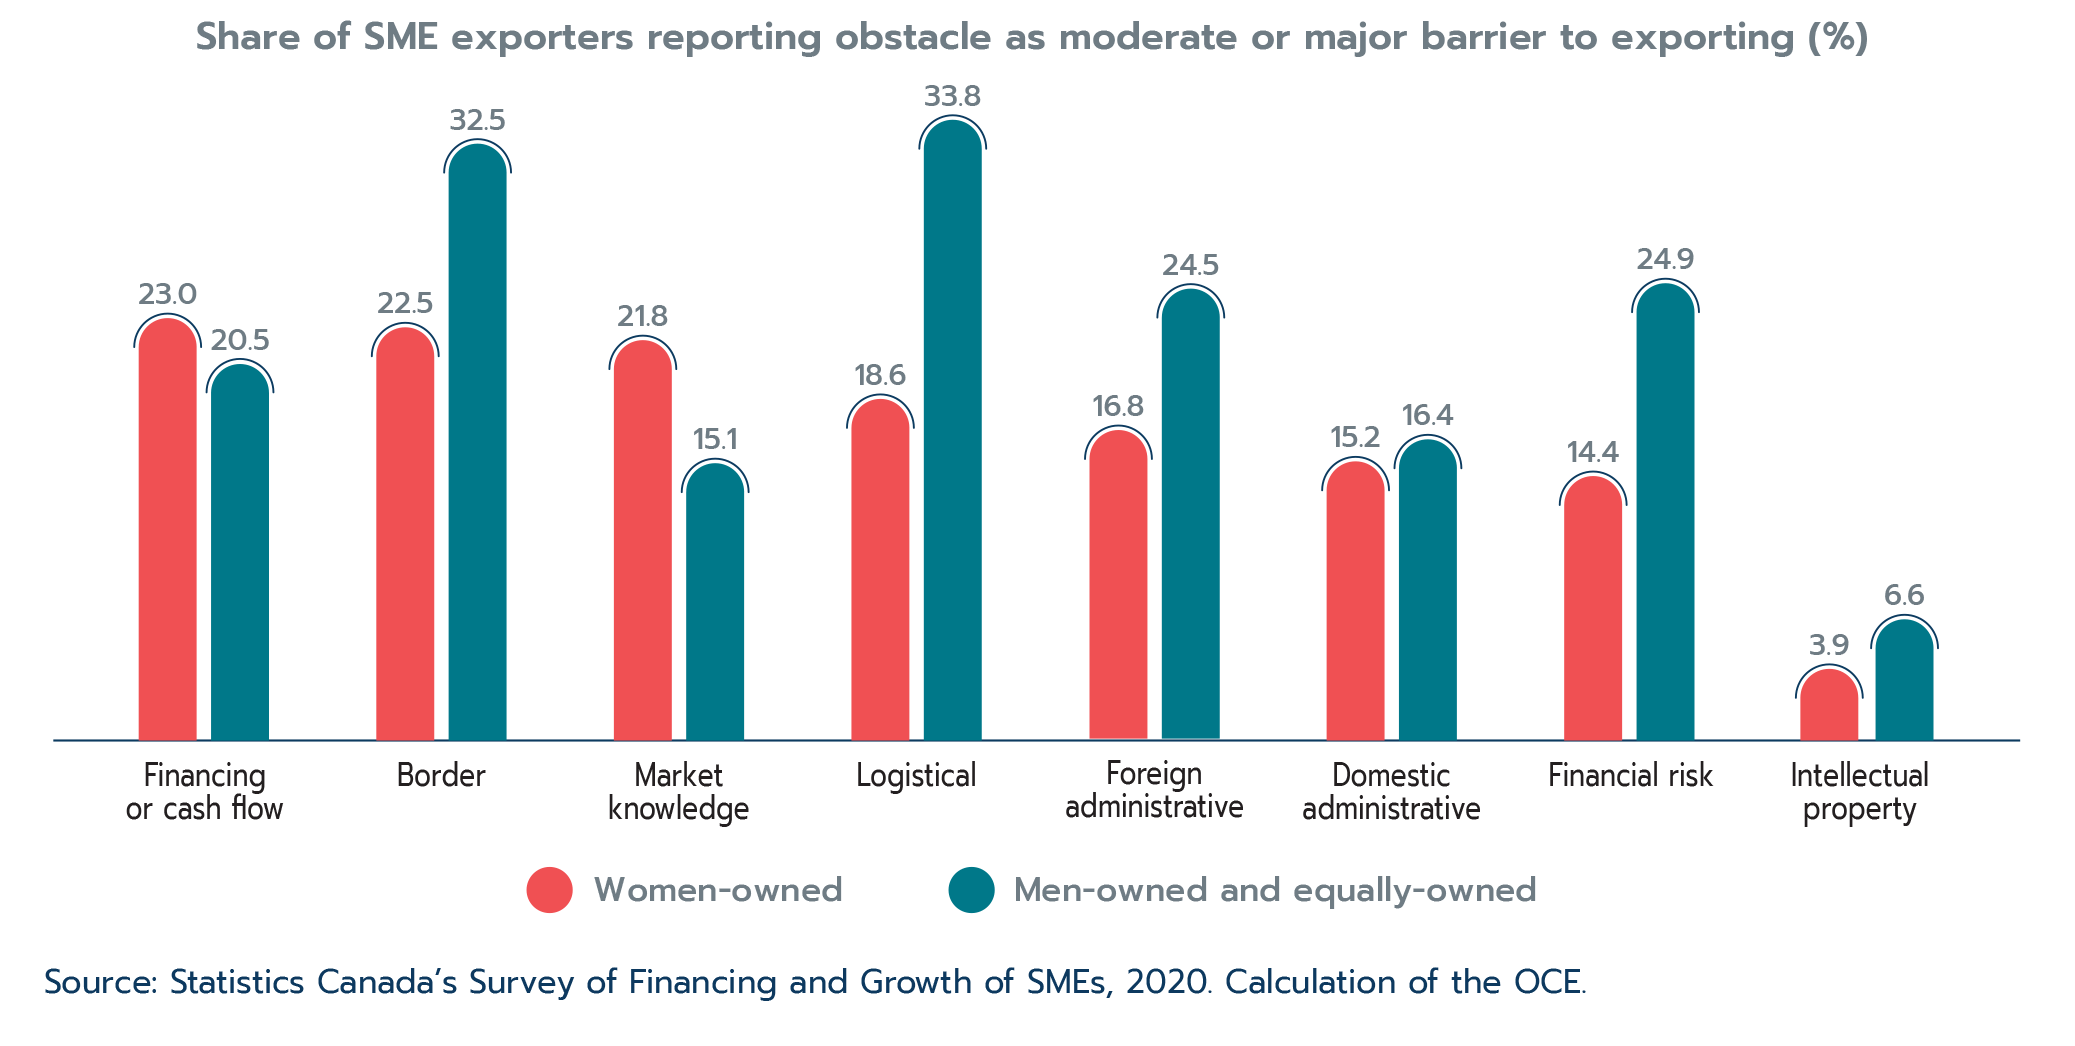 Figure 2.22: Obstacles to exporting, by gender, in 2020 